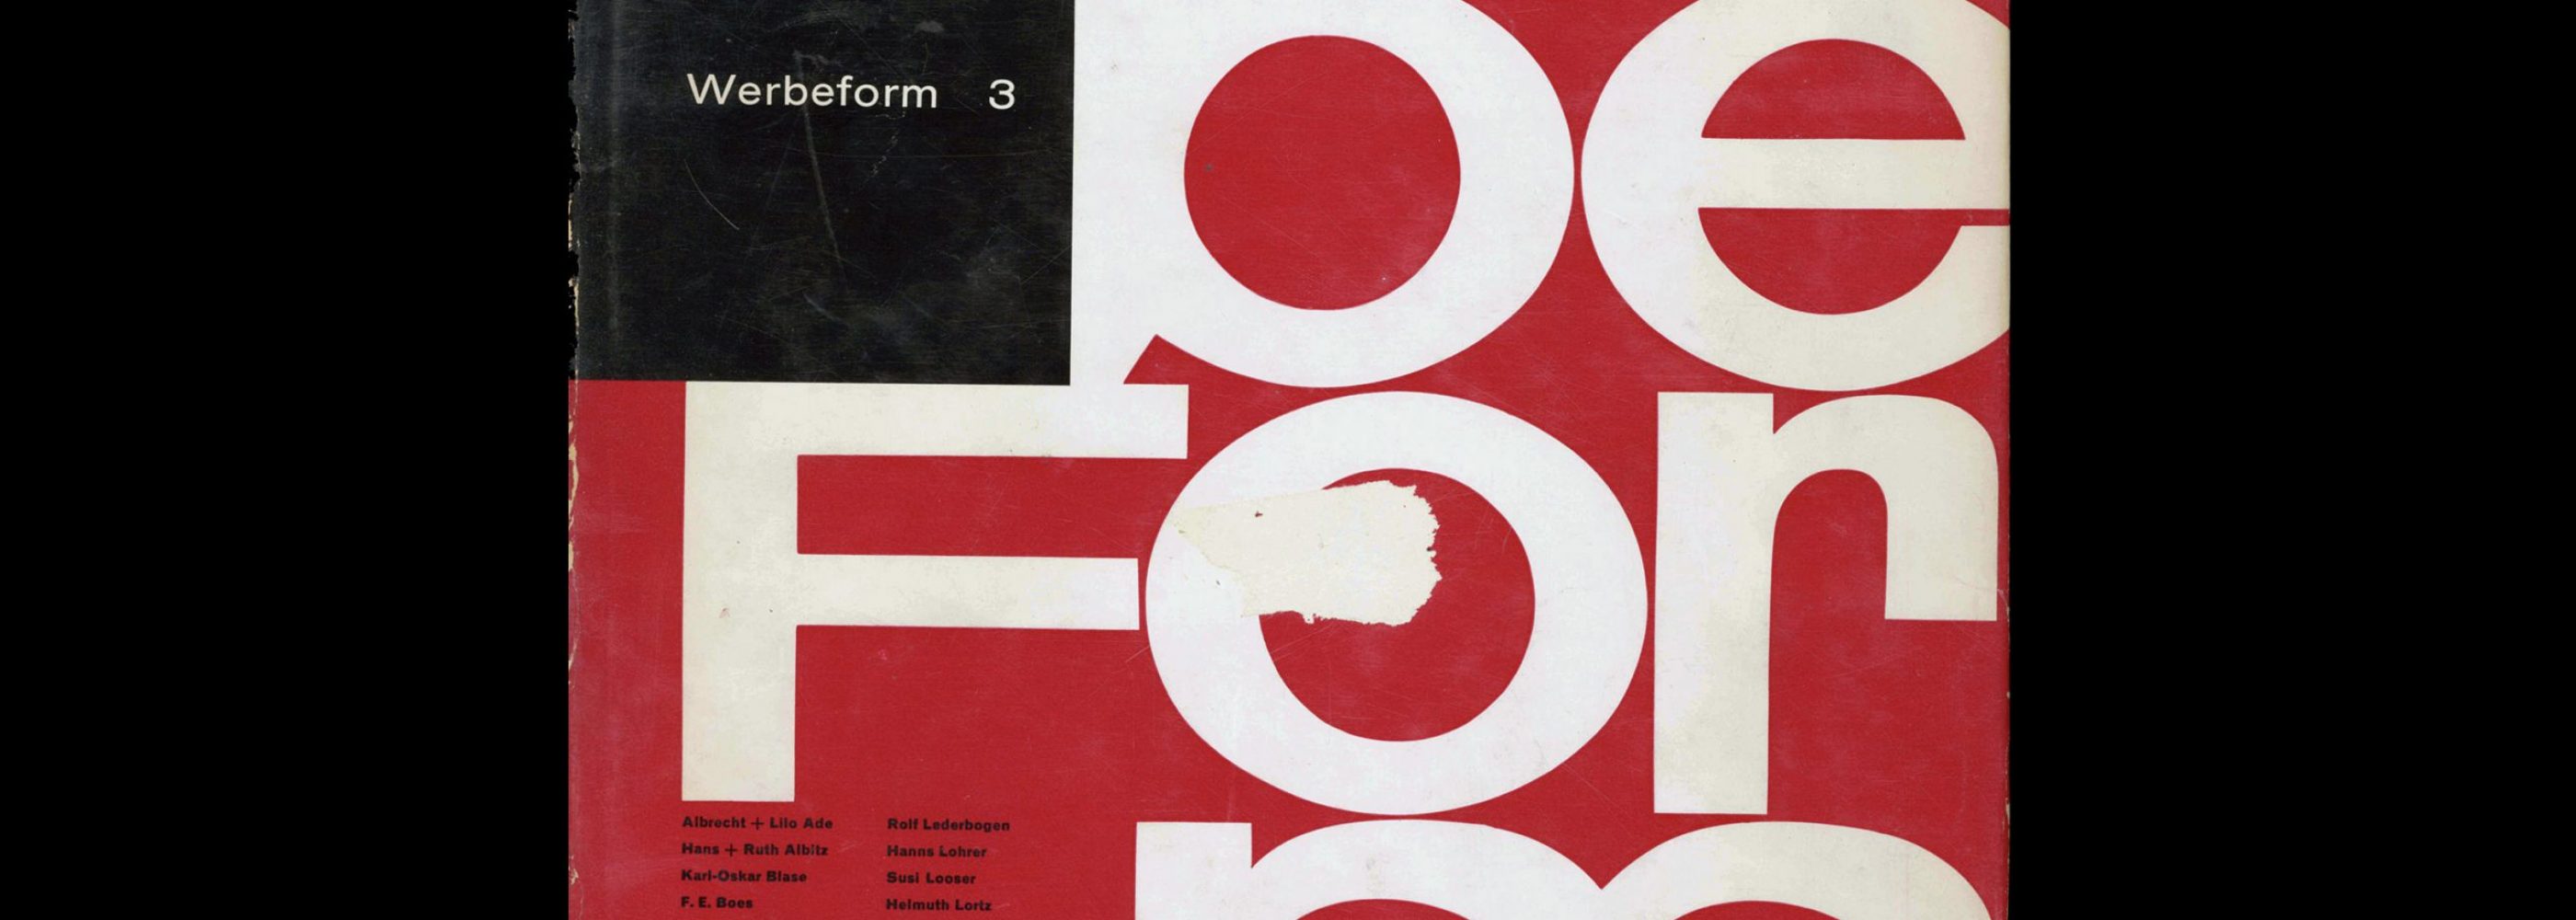 Werbeform 3, Annual Review Of Advertising And Design, 1959 Spread